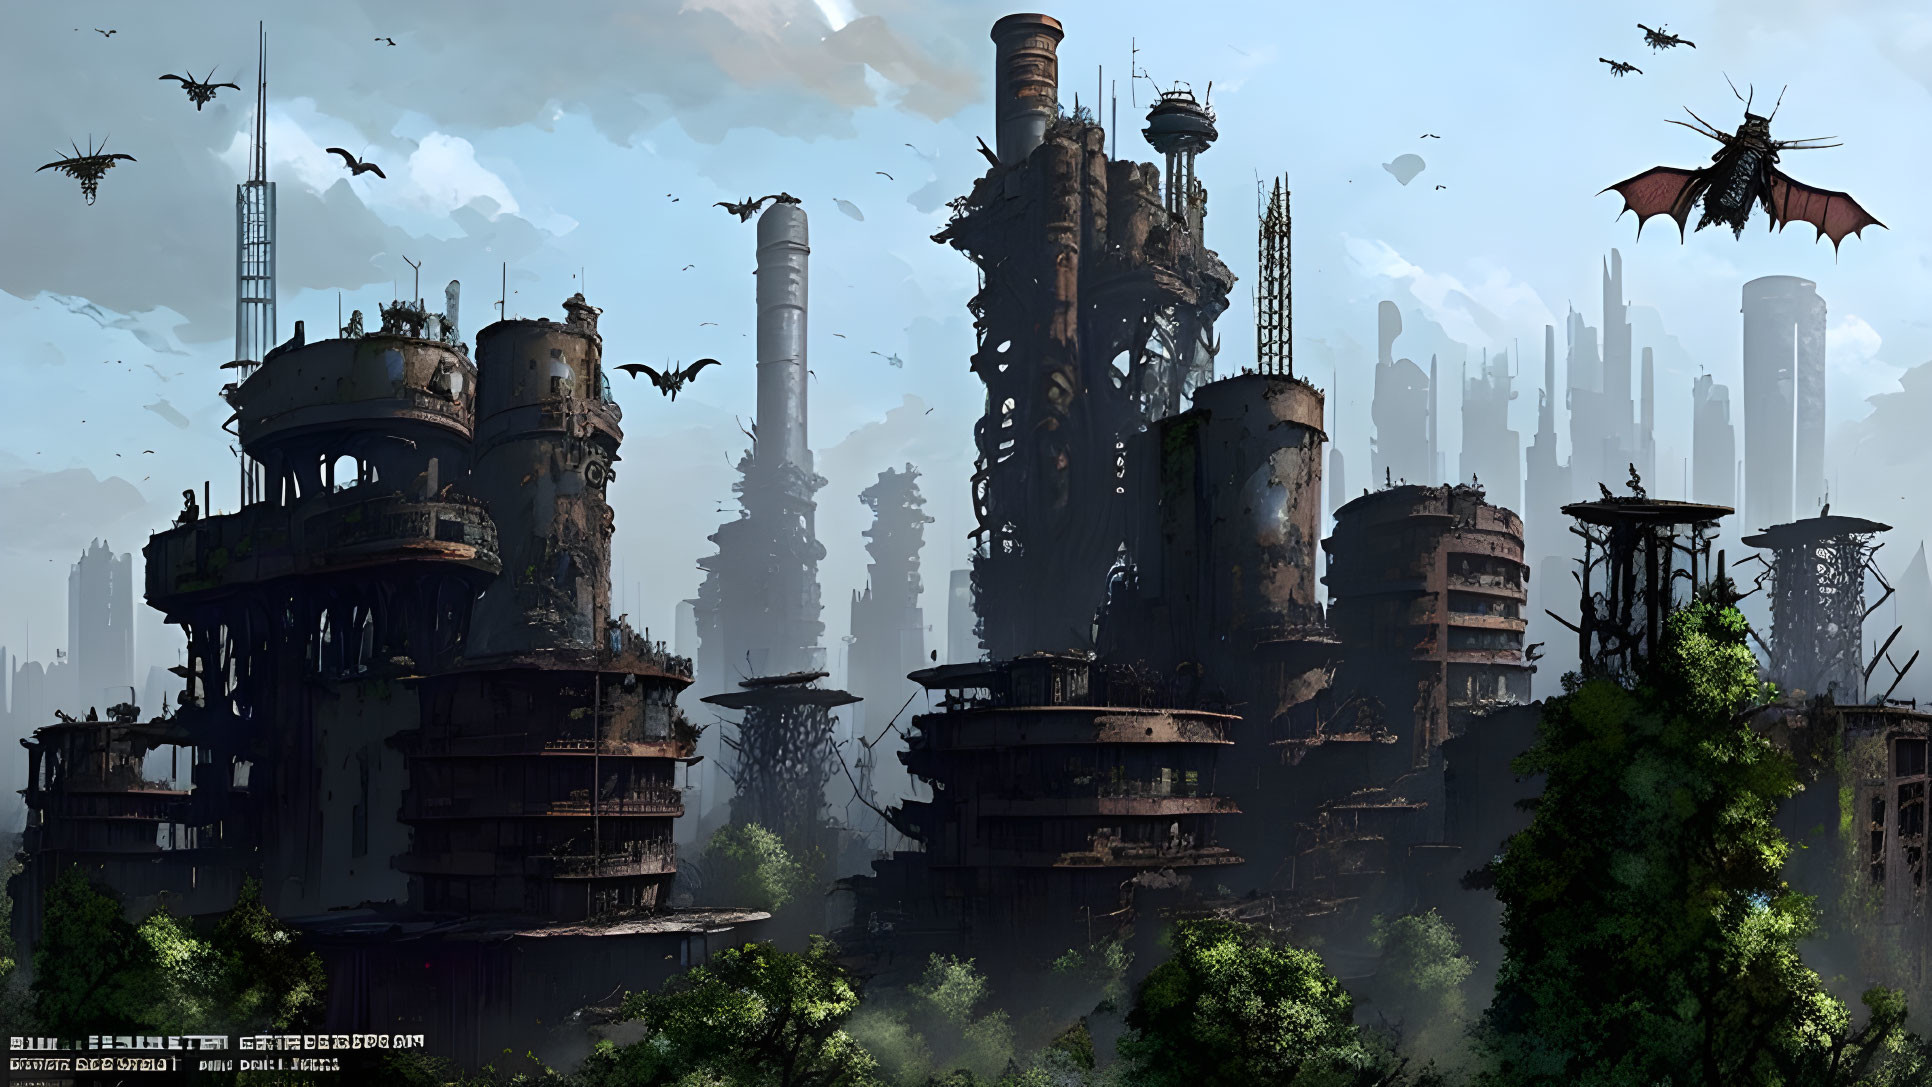 Derelict industrial towers in dystopian landscape with dragons under hazy sky